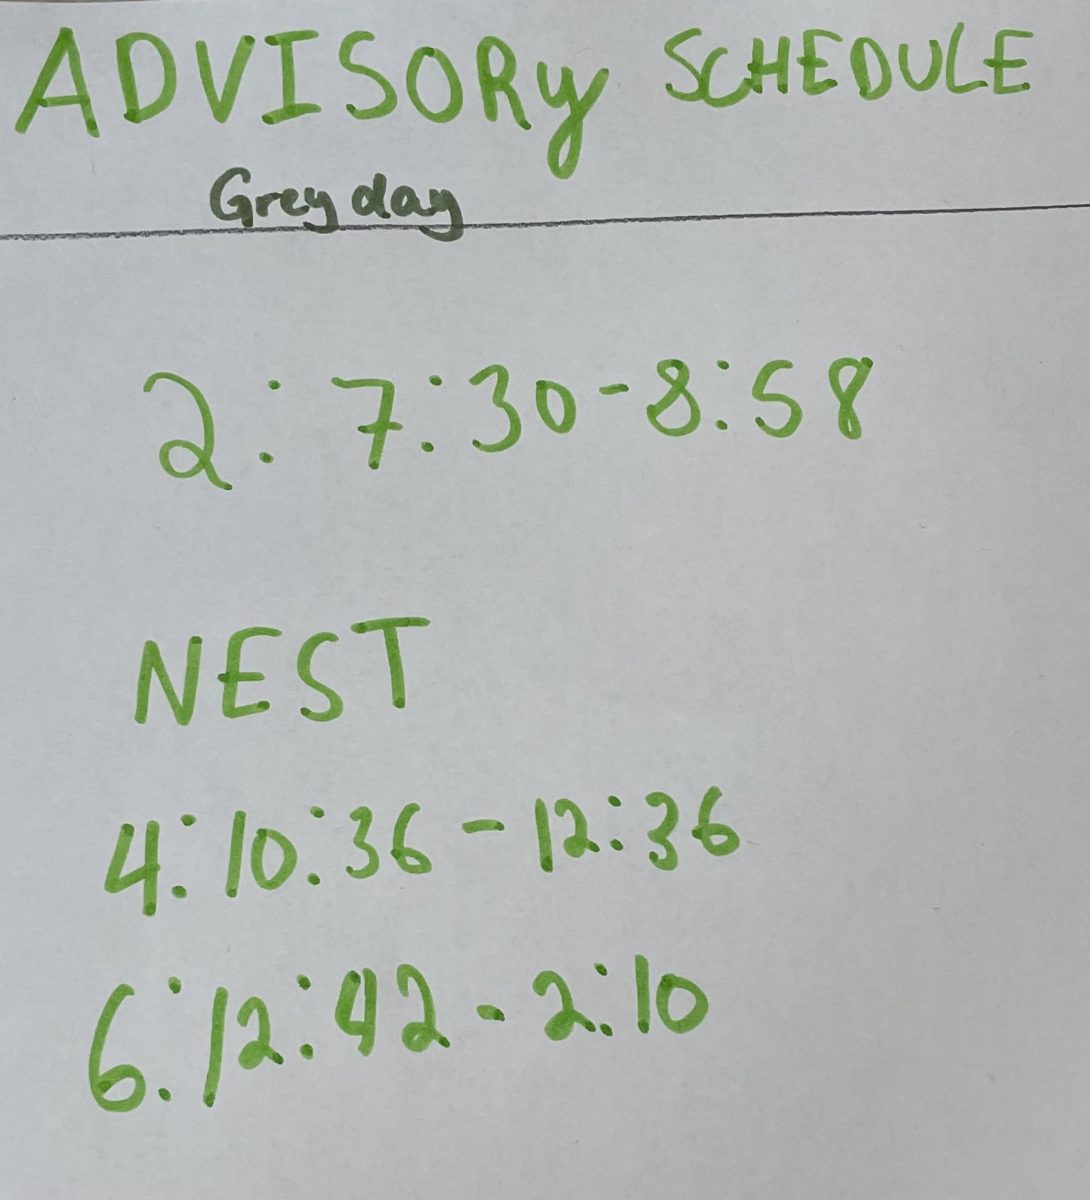 Student Opinions on the Advisory Schedule